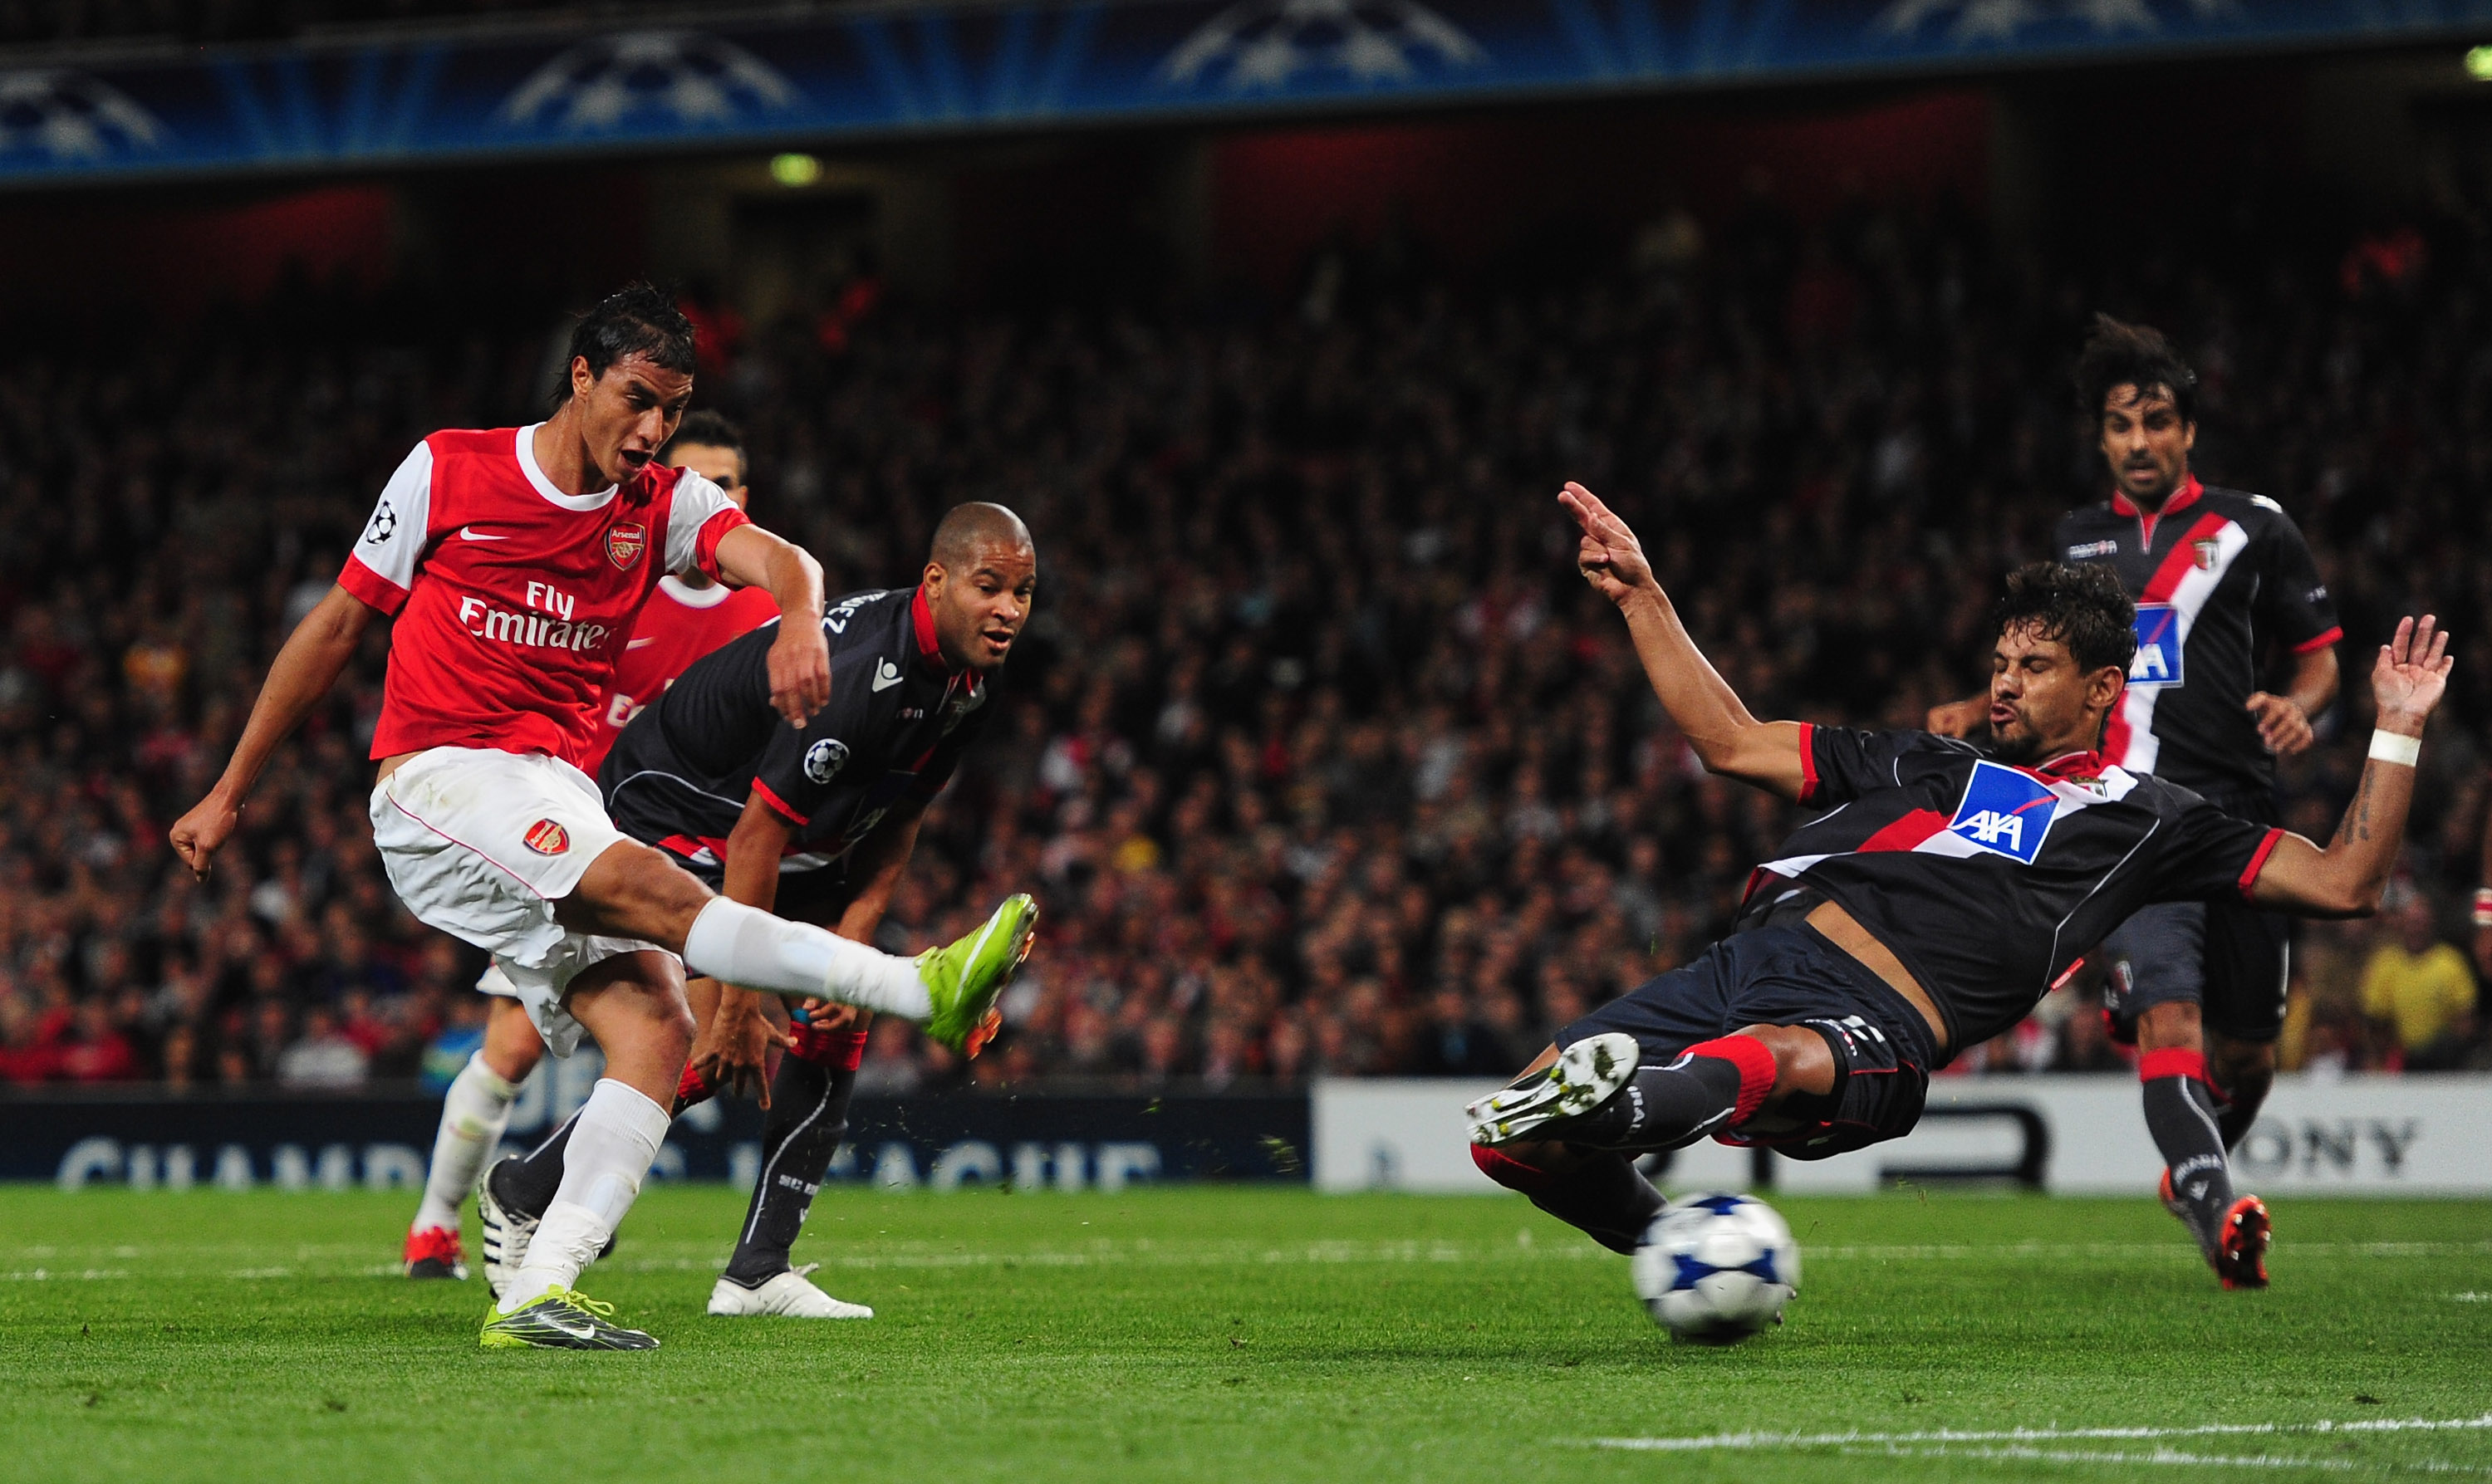 LONDON, ENGLAND - SEPTEMBER 15:  Marouane Chamakh of Arsenal scores his team's third goal despite the efforts of Moises of Braga during the UEFA Champions League Group H match between Arsenal and SC Braga at the Emirates Stadium on September 15, 2010 in L